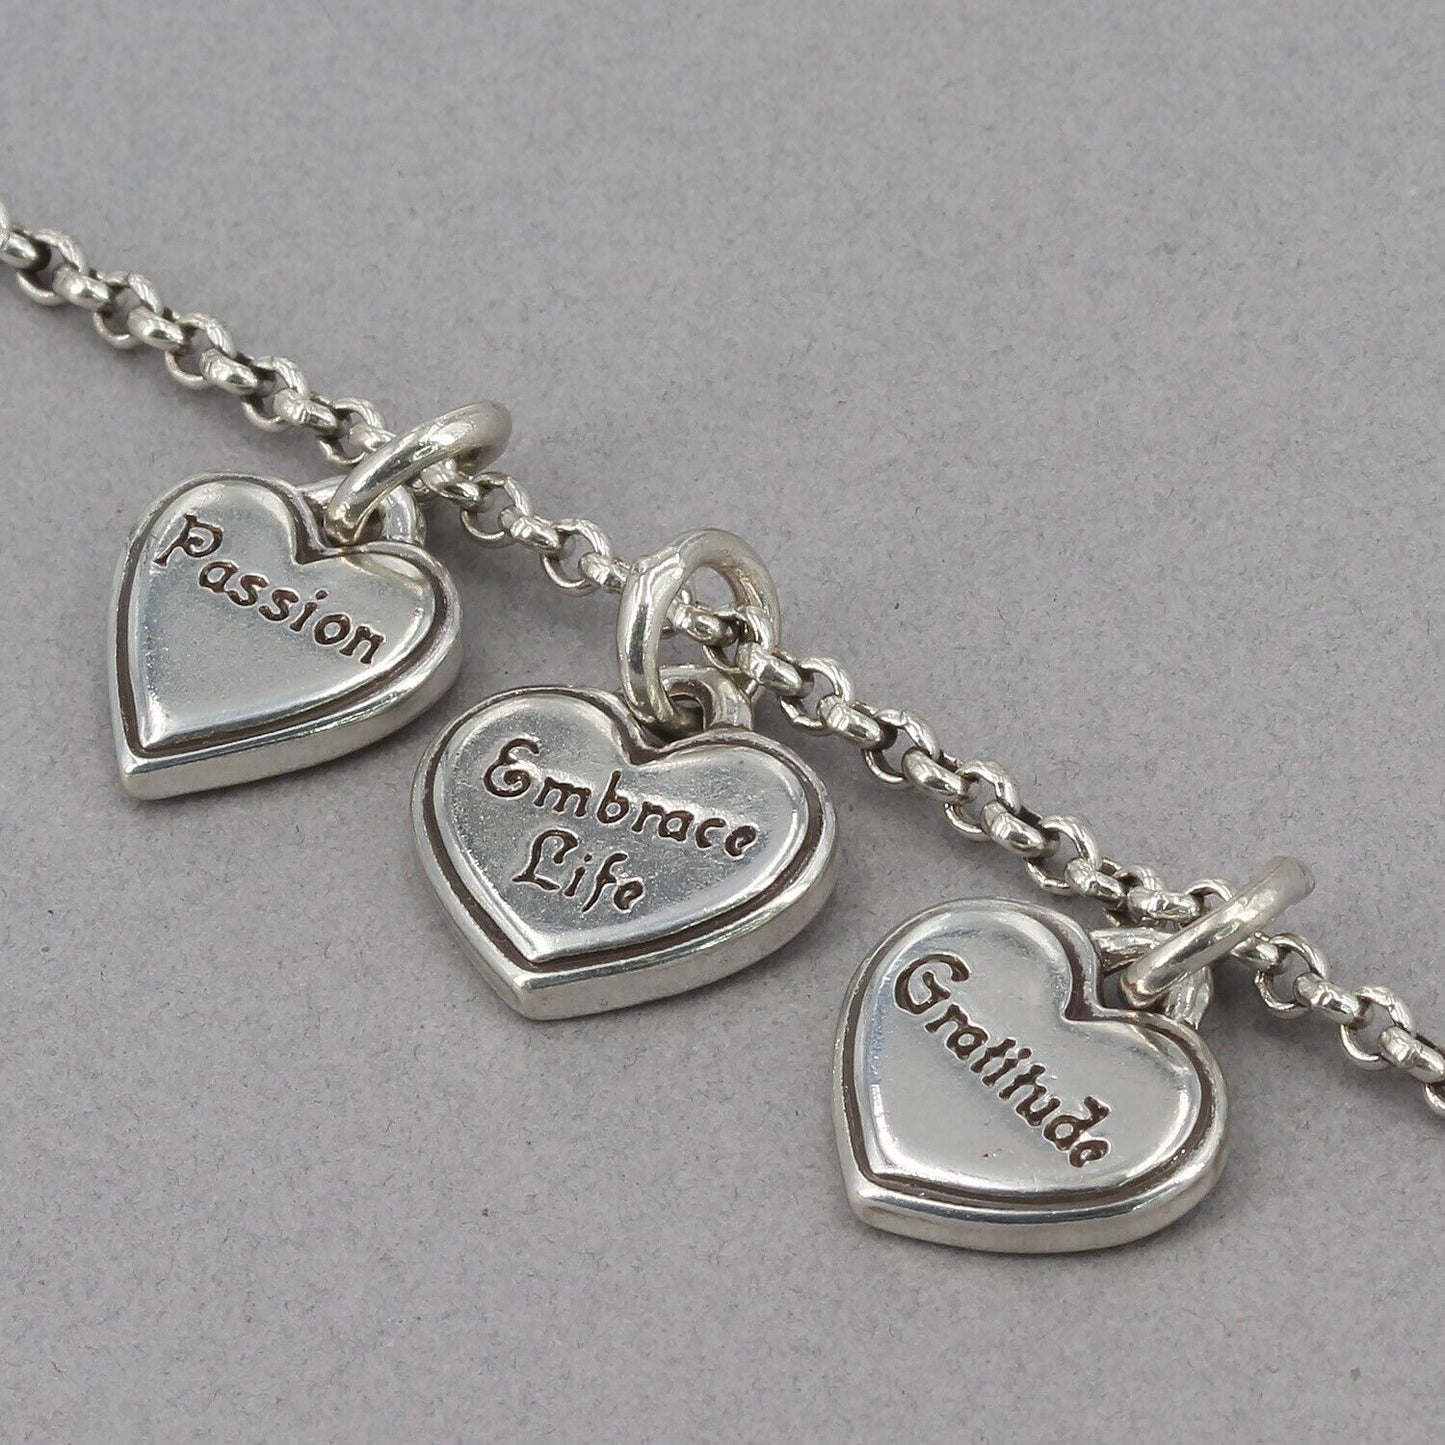 Brighton Piccadilly Heart Charm Necklace Love Passion Gratitude & Embrace Life